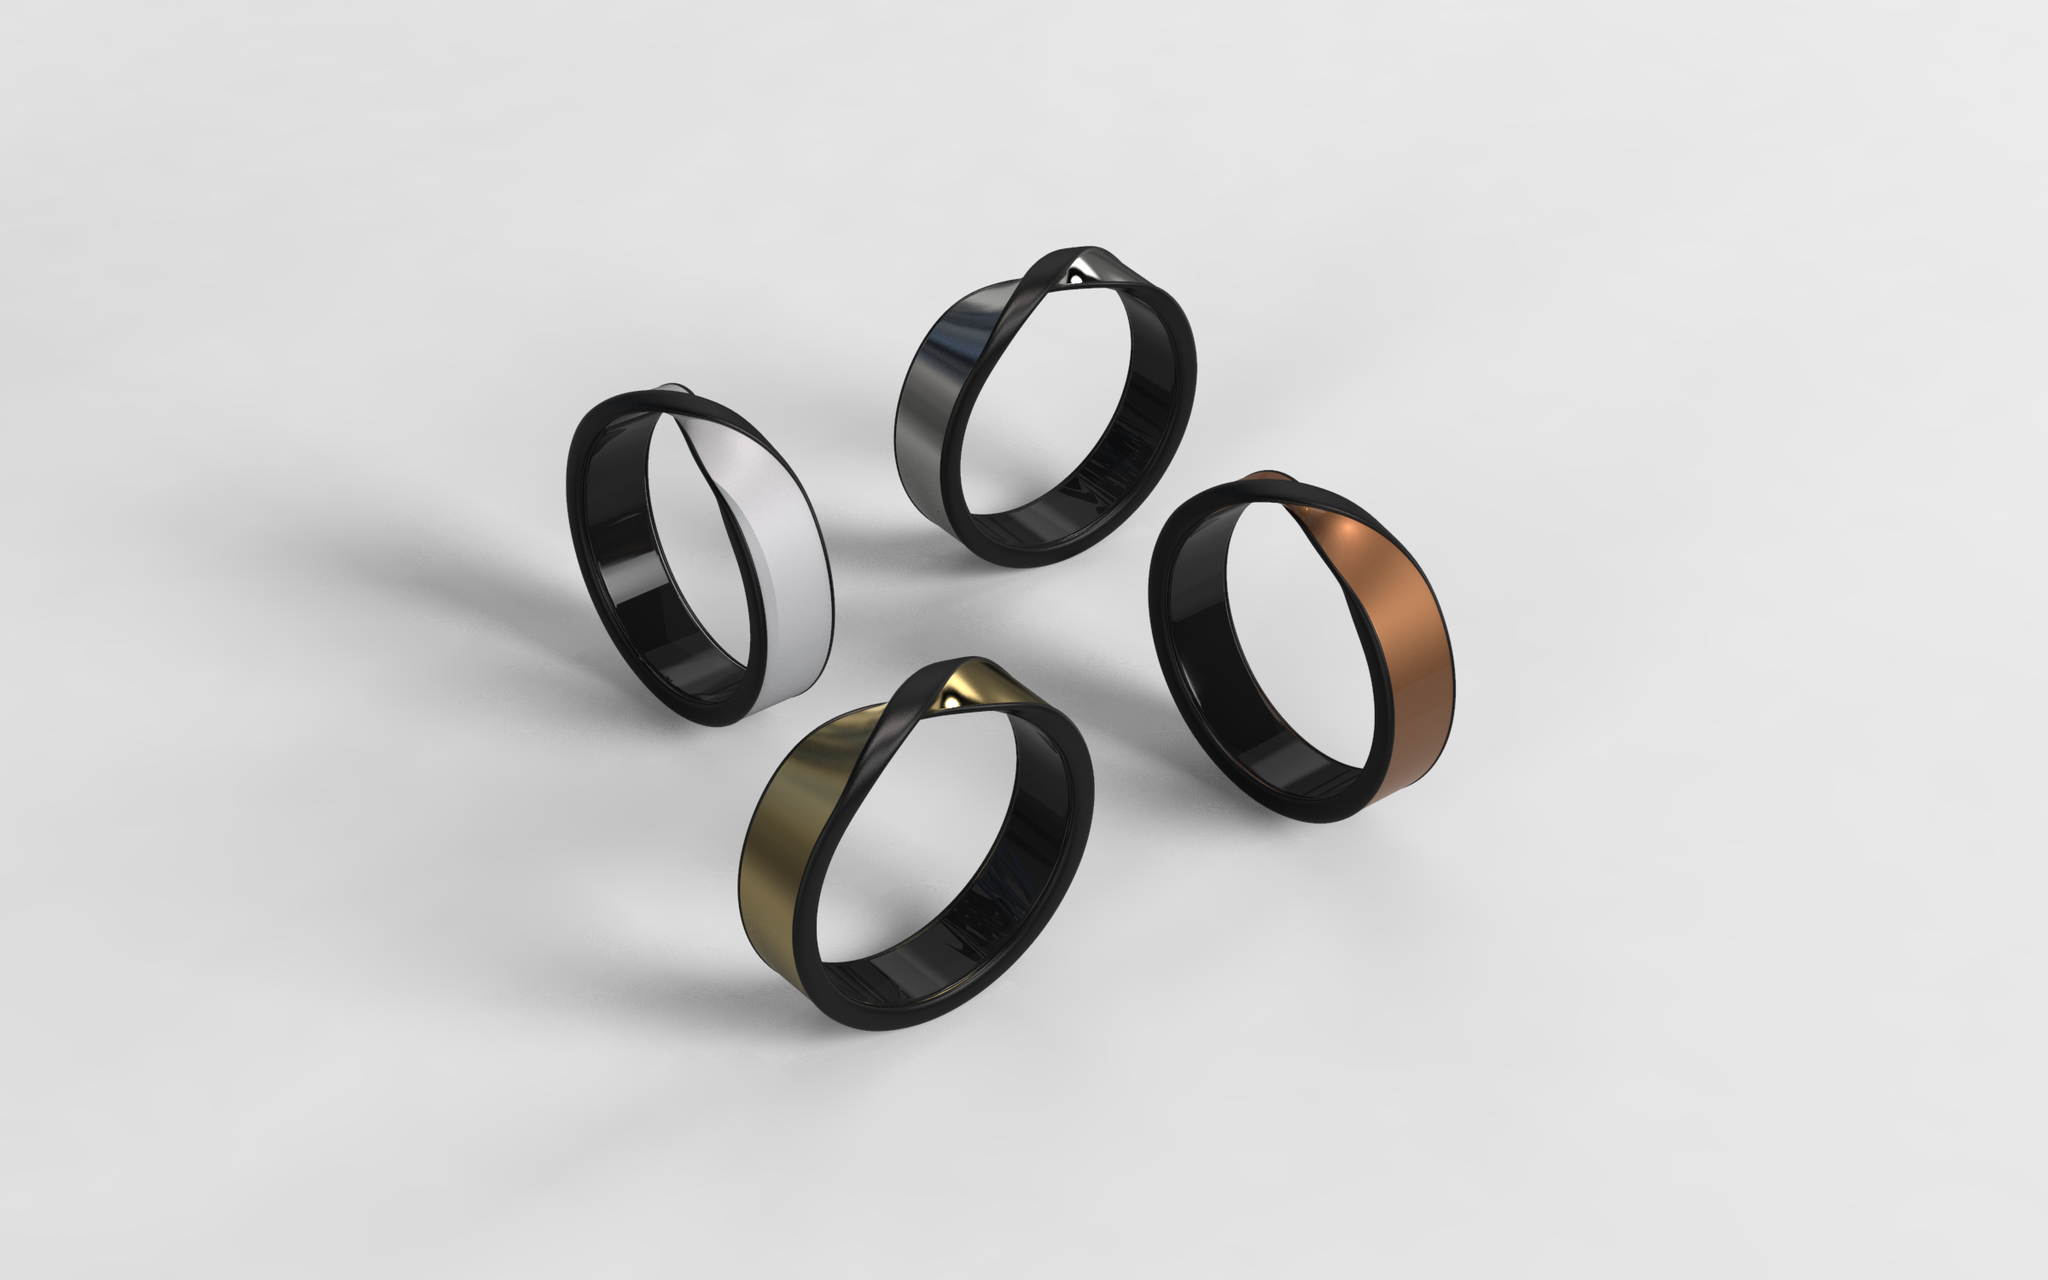 Movano to Unveil Women's Smart Ring for Health Monitoring at CES 2022